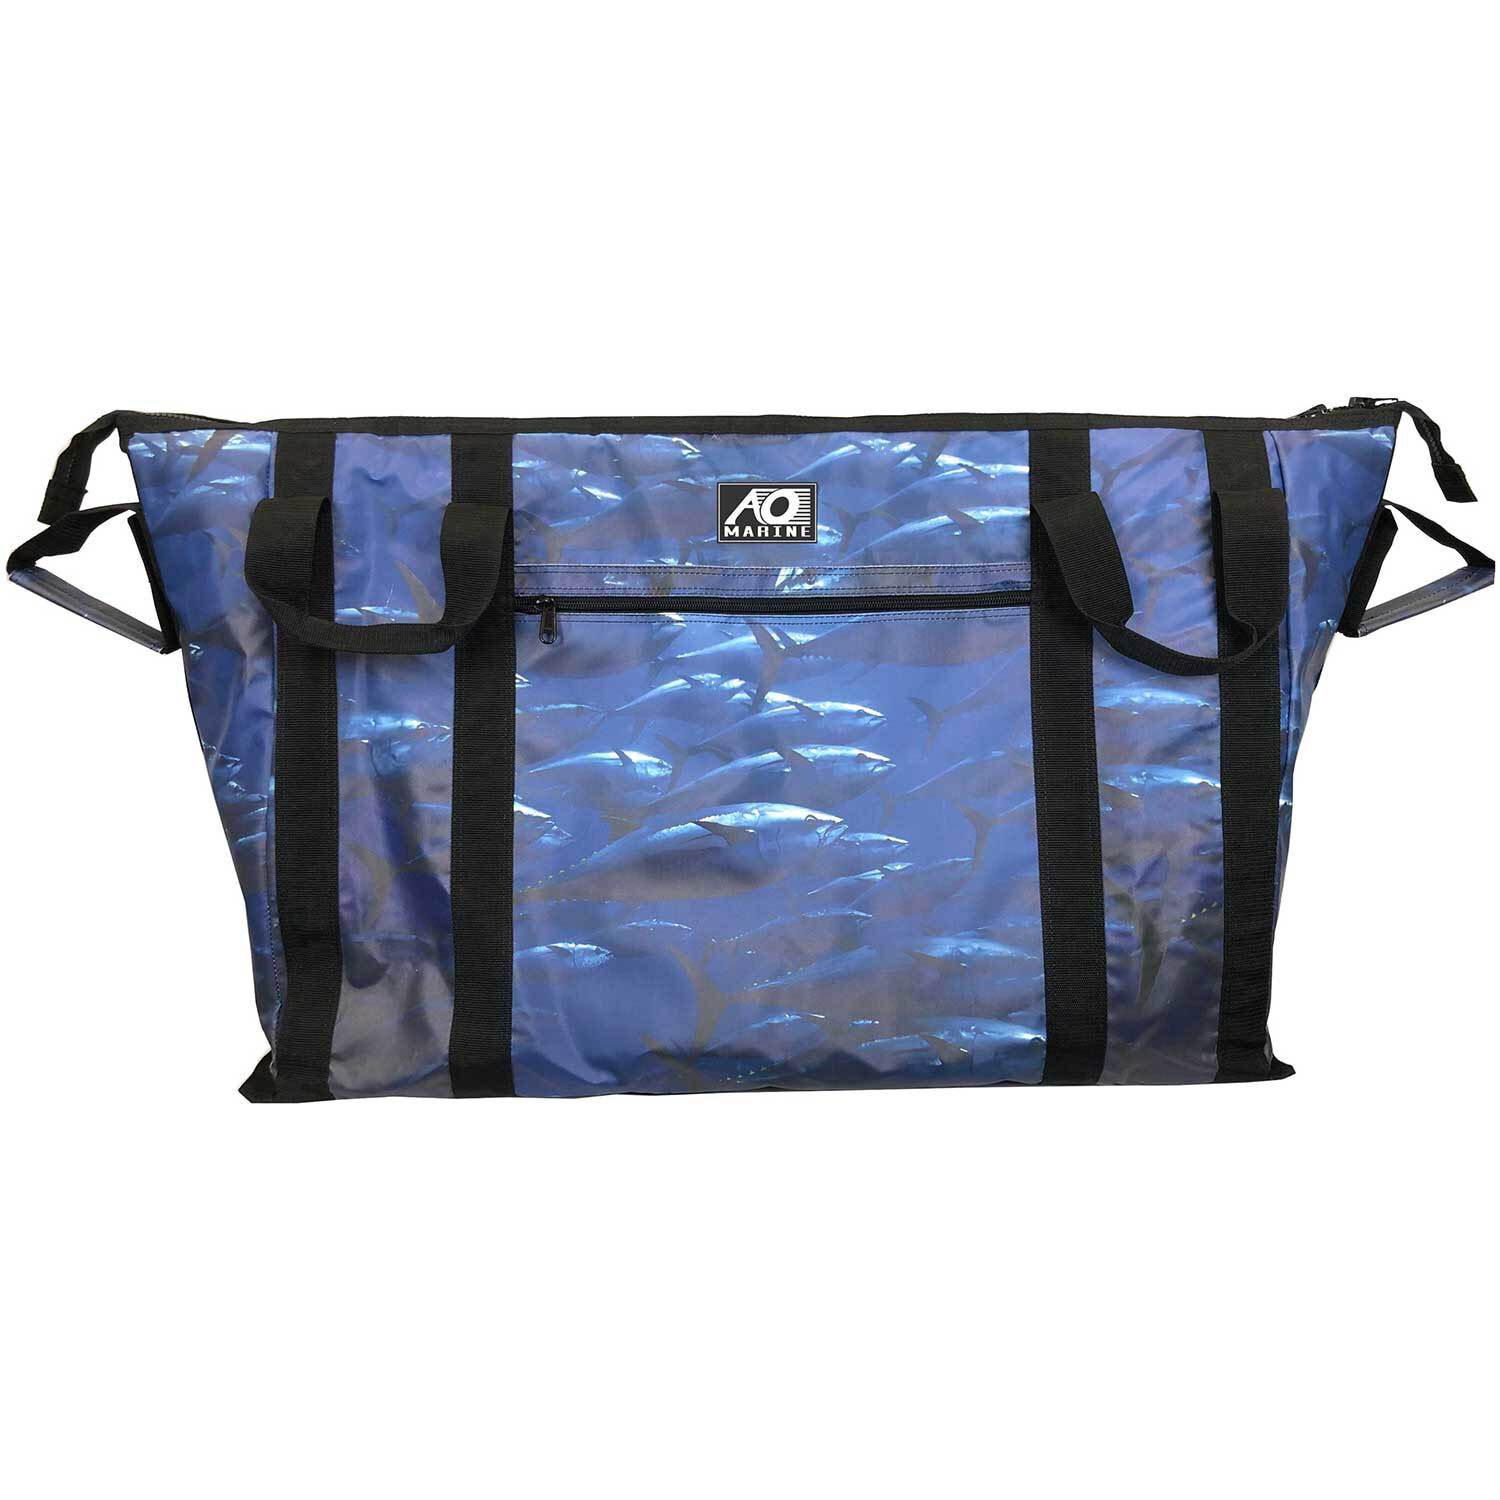 World class insulated fish cooler bags in 3 sizes are available at FISH  KILL BAGS for you now Our fish kill bags have some great features such  as  By Fish Kill